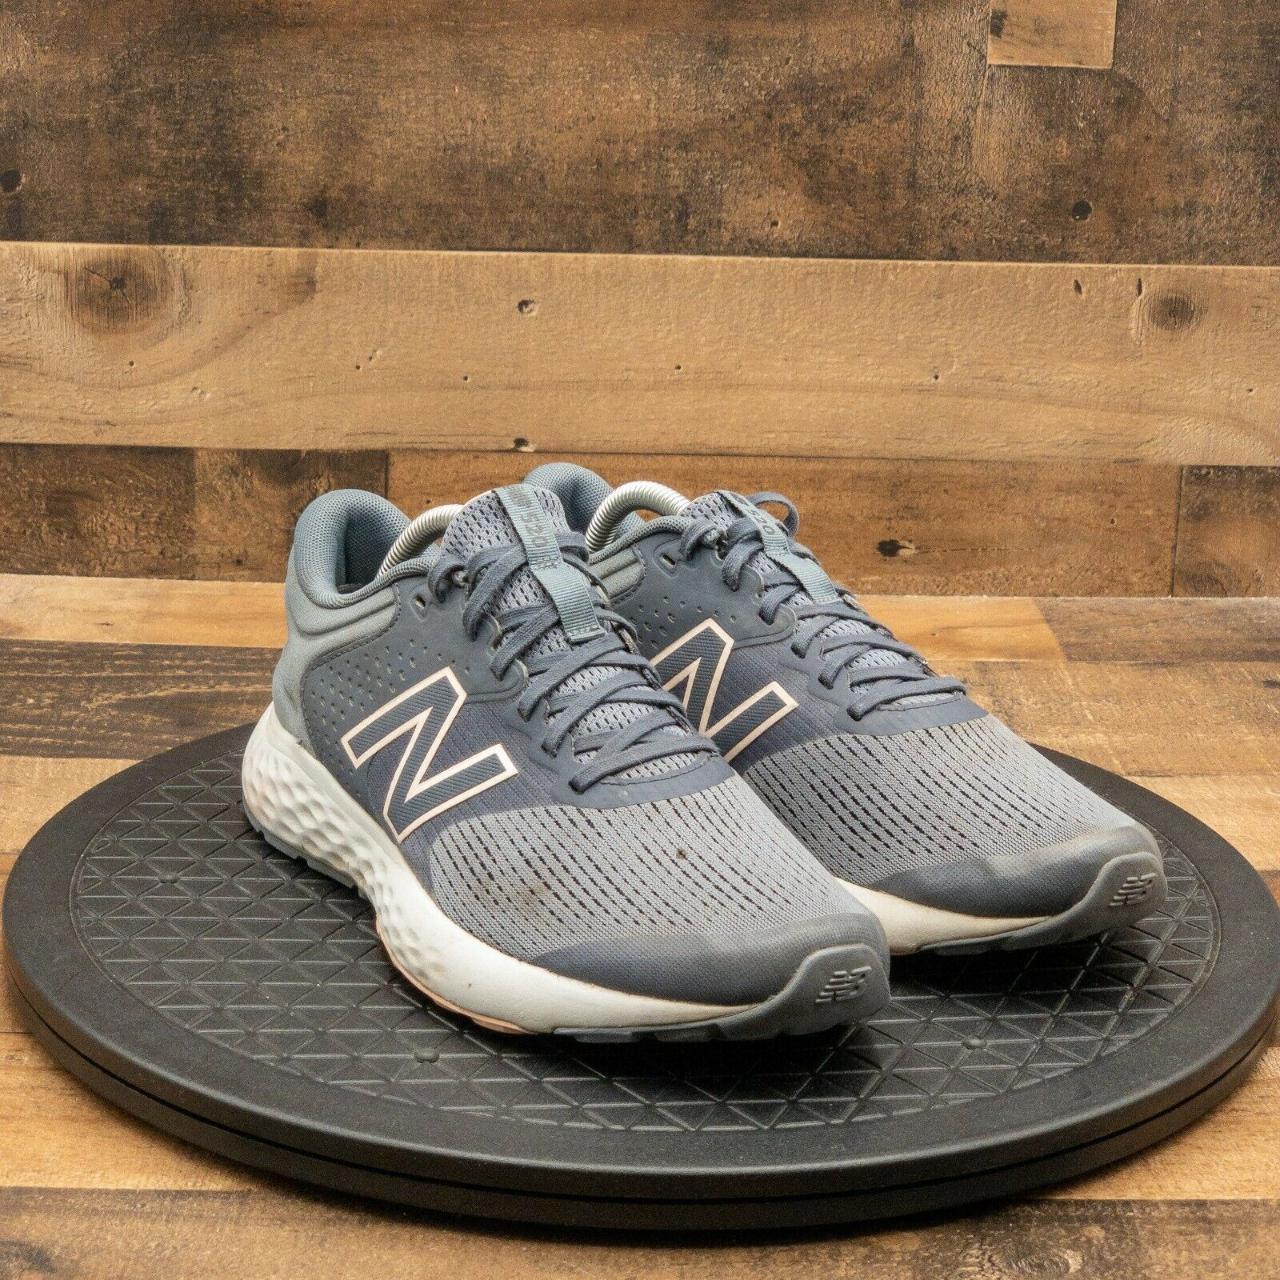 New Balance Women's Blue and Grey Trainers (3)